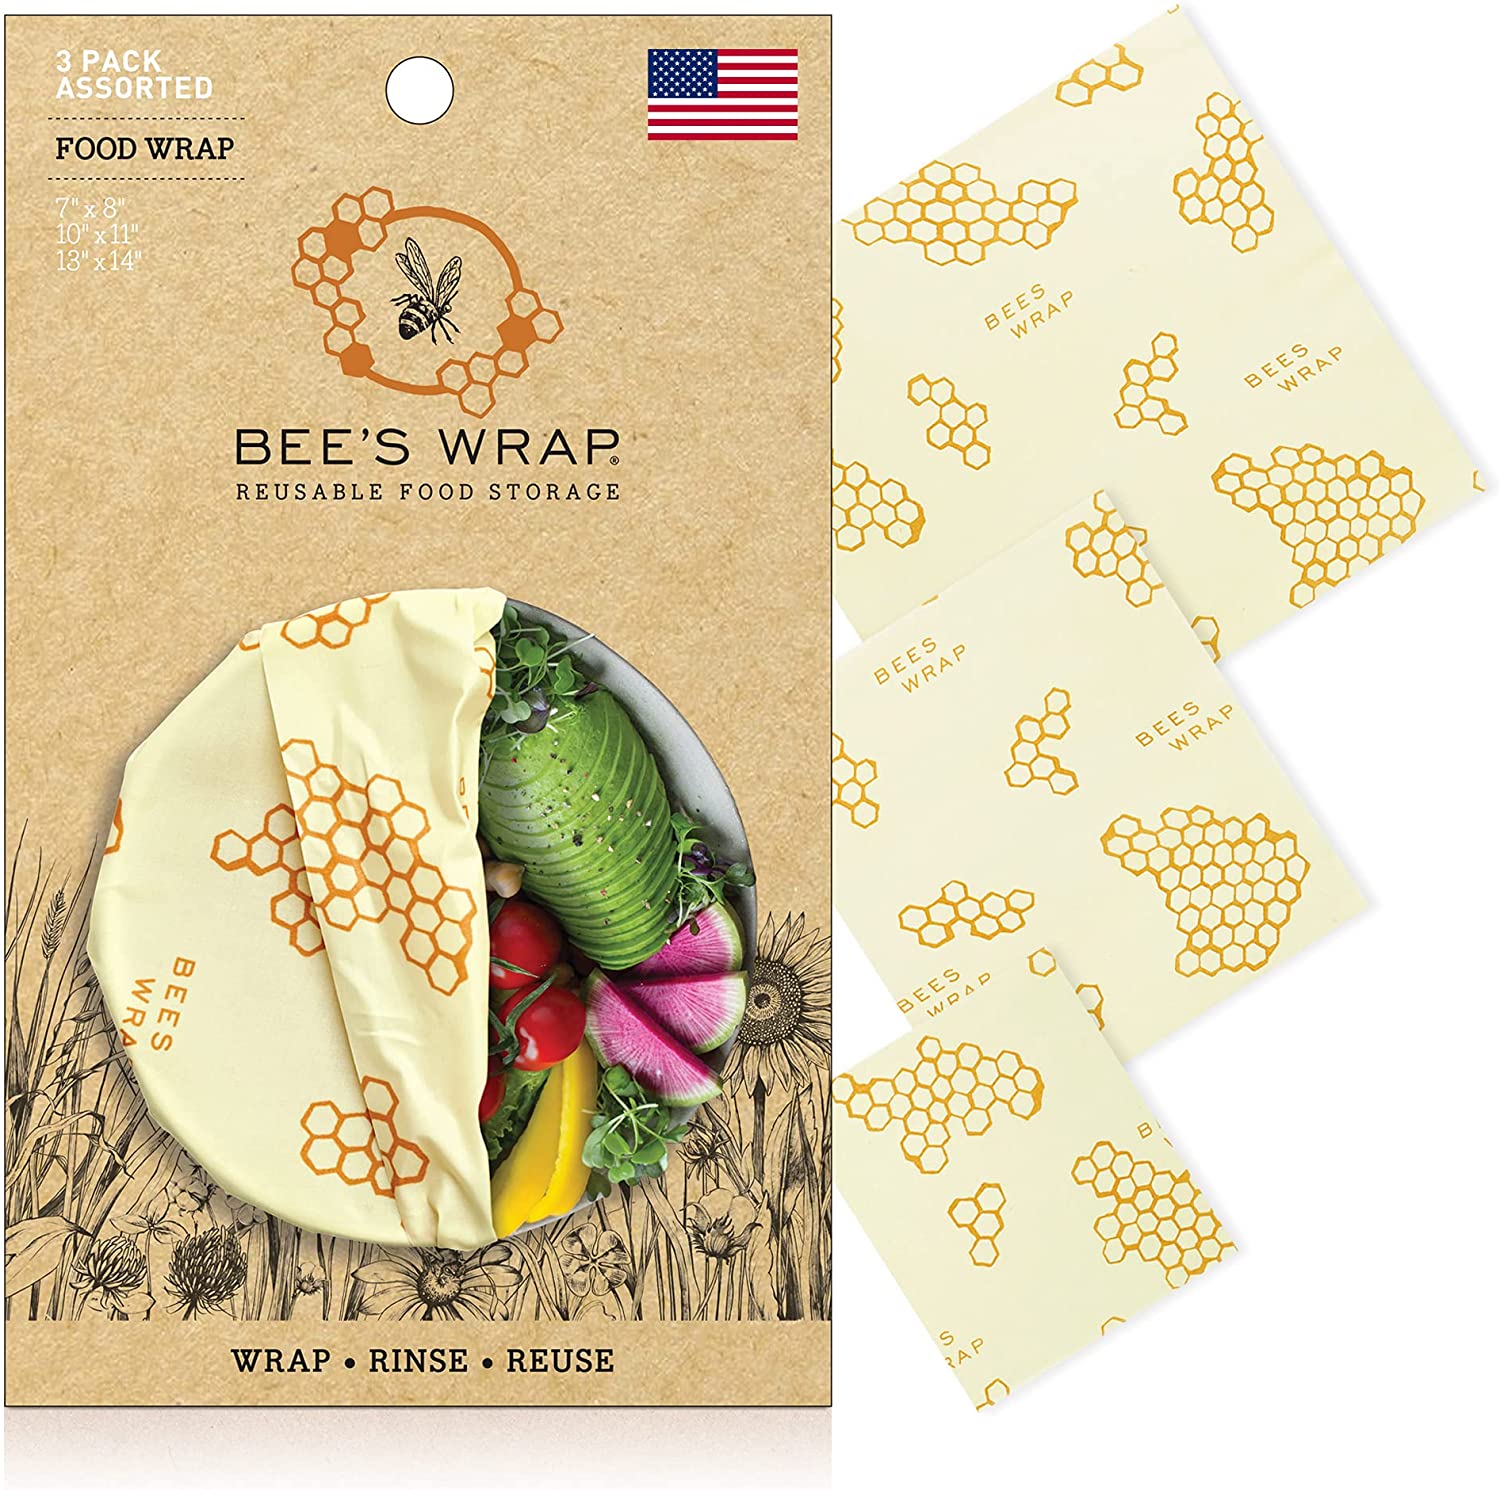 Bee's Wax Wrap Assorted Pack of 3 Honeycomb – Unpacked Living